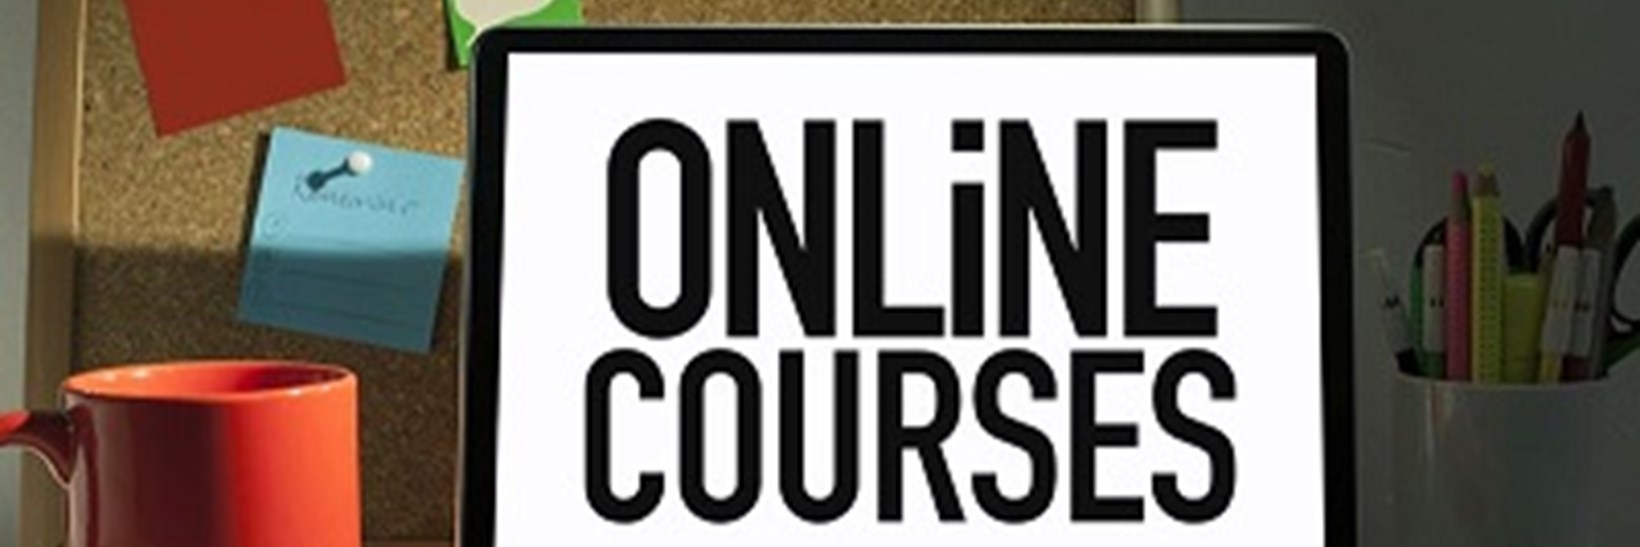 Computer displaying words "Online courses"